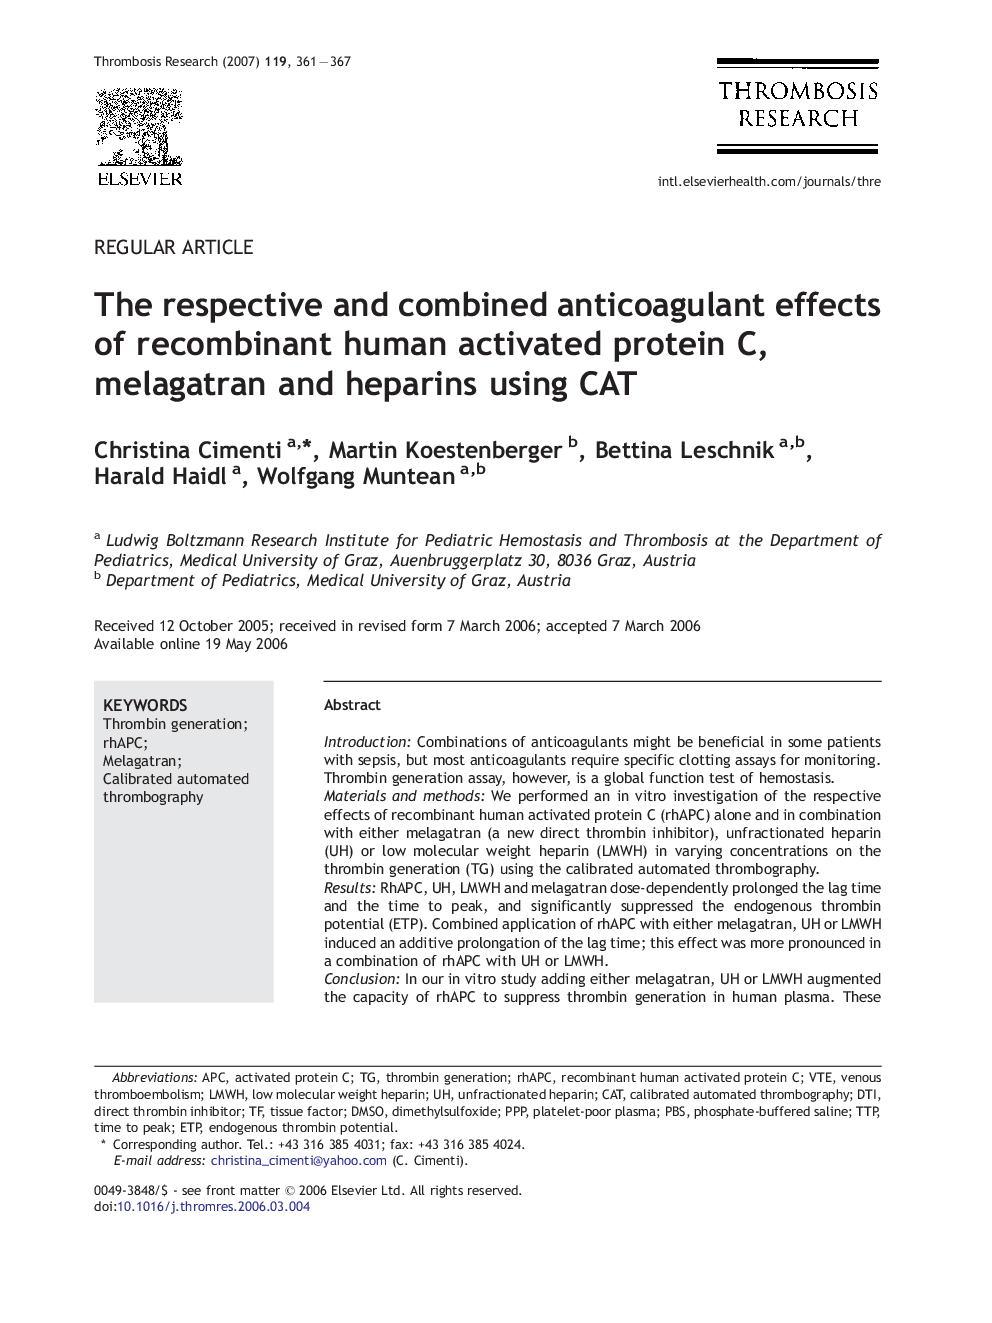 The respective and combined anticoagulant effects of recombinant human activated protein C, melagatran and heparins using CAT